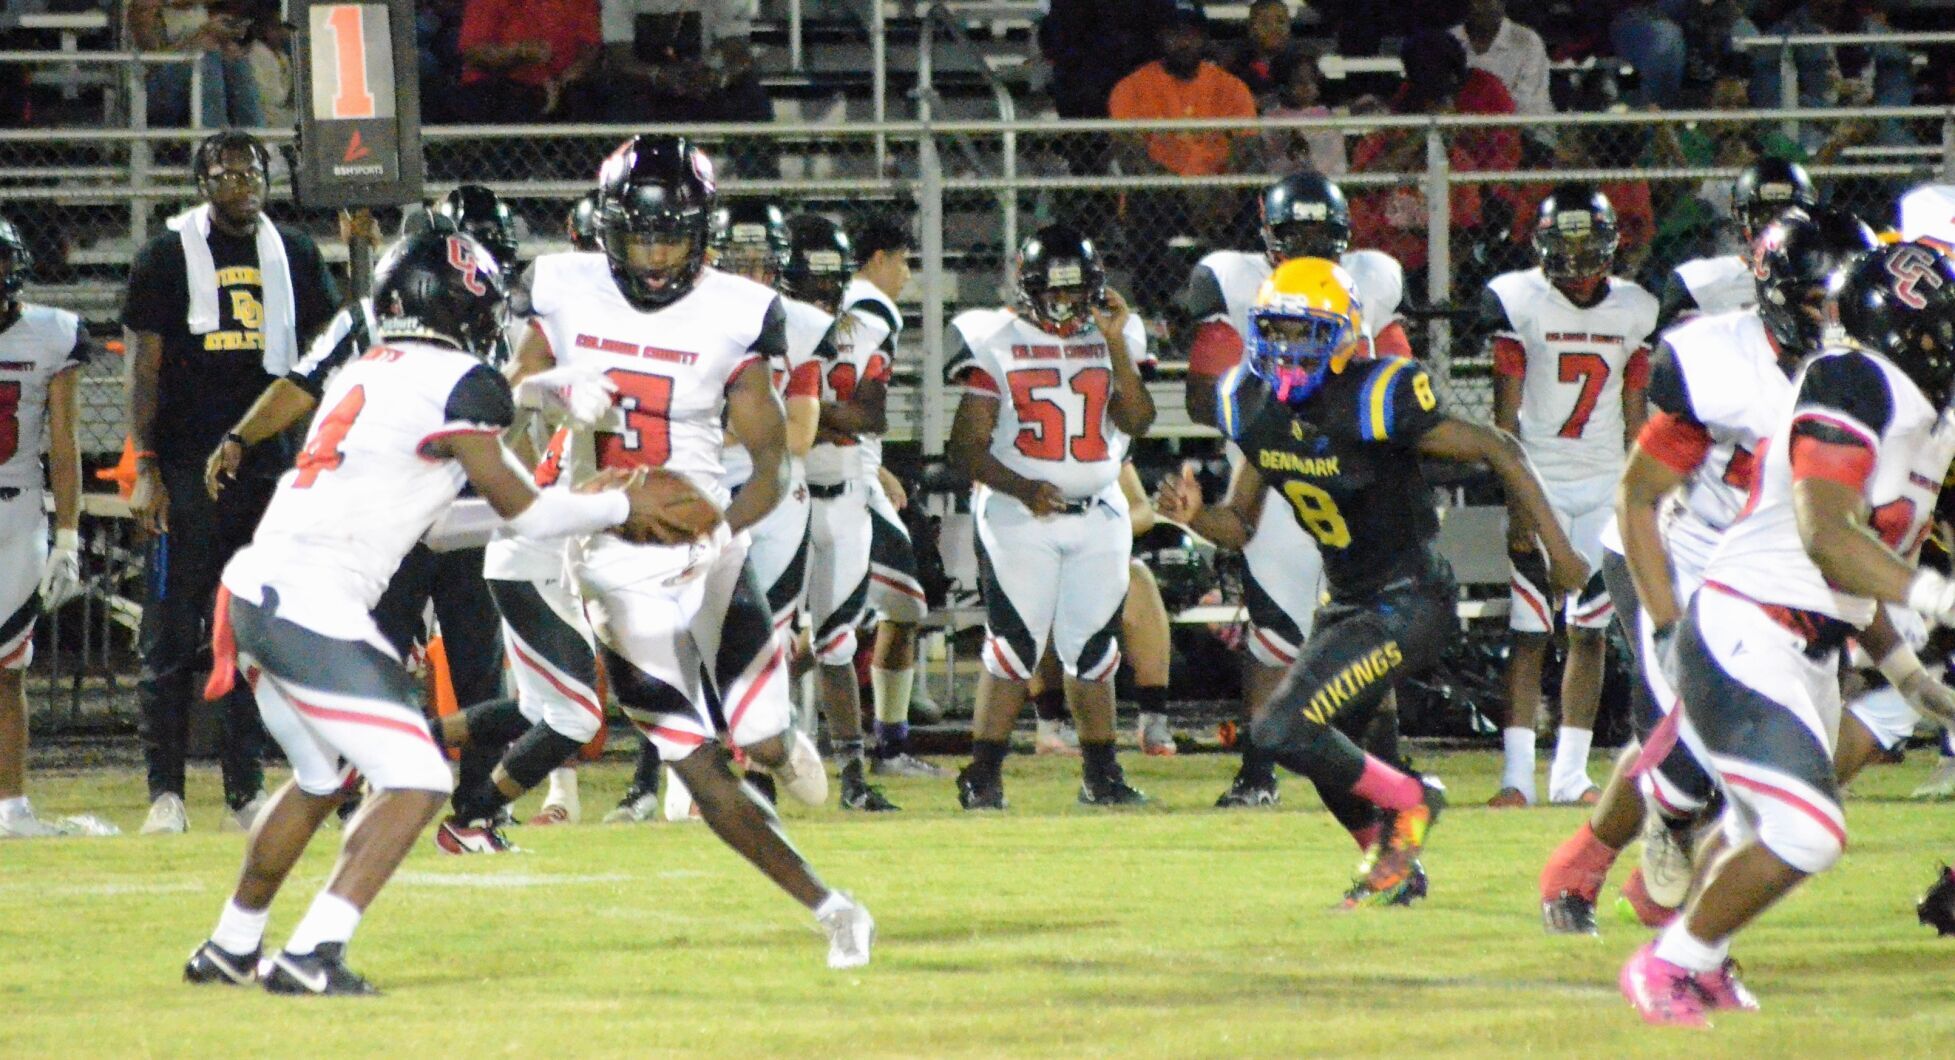 Calhoun County defeats Denmark-Olar to stay in the running for the Region IV-A championship